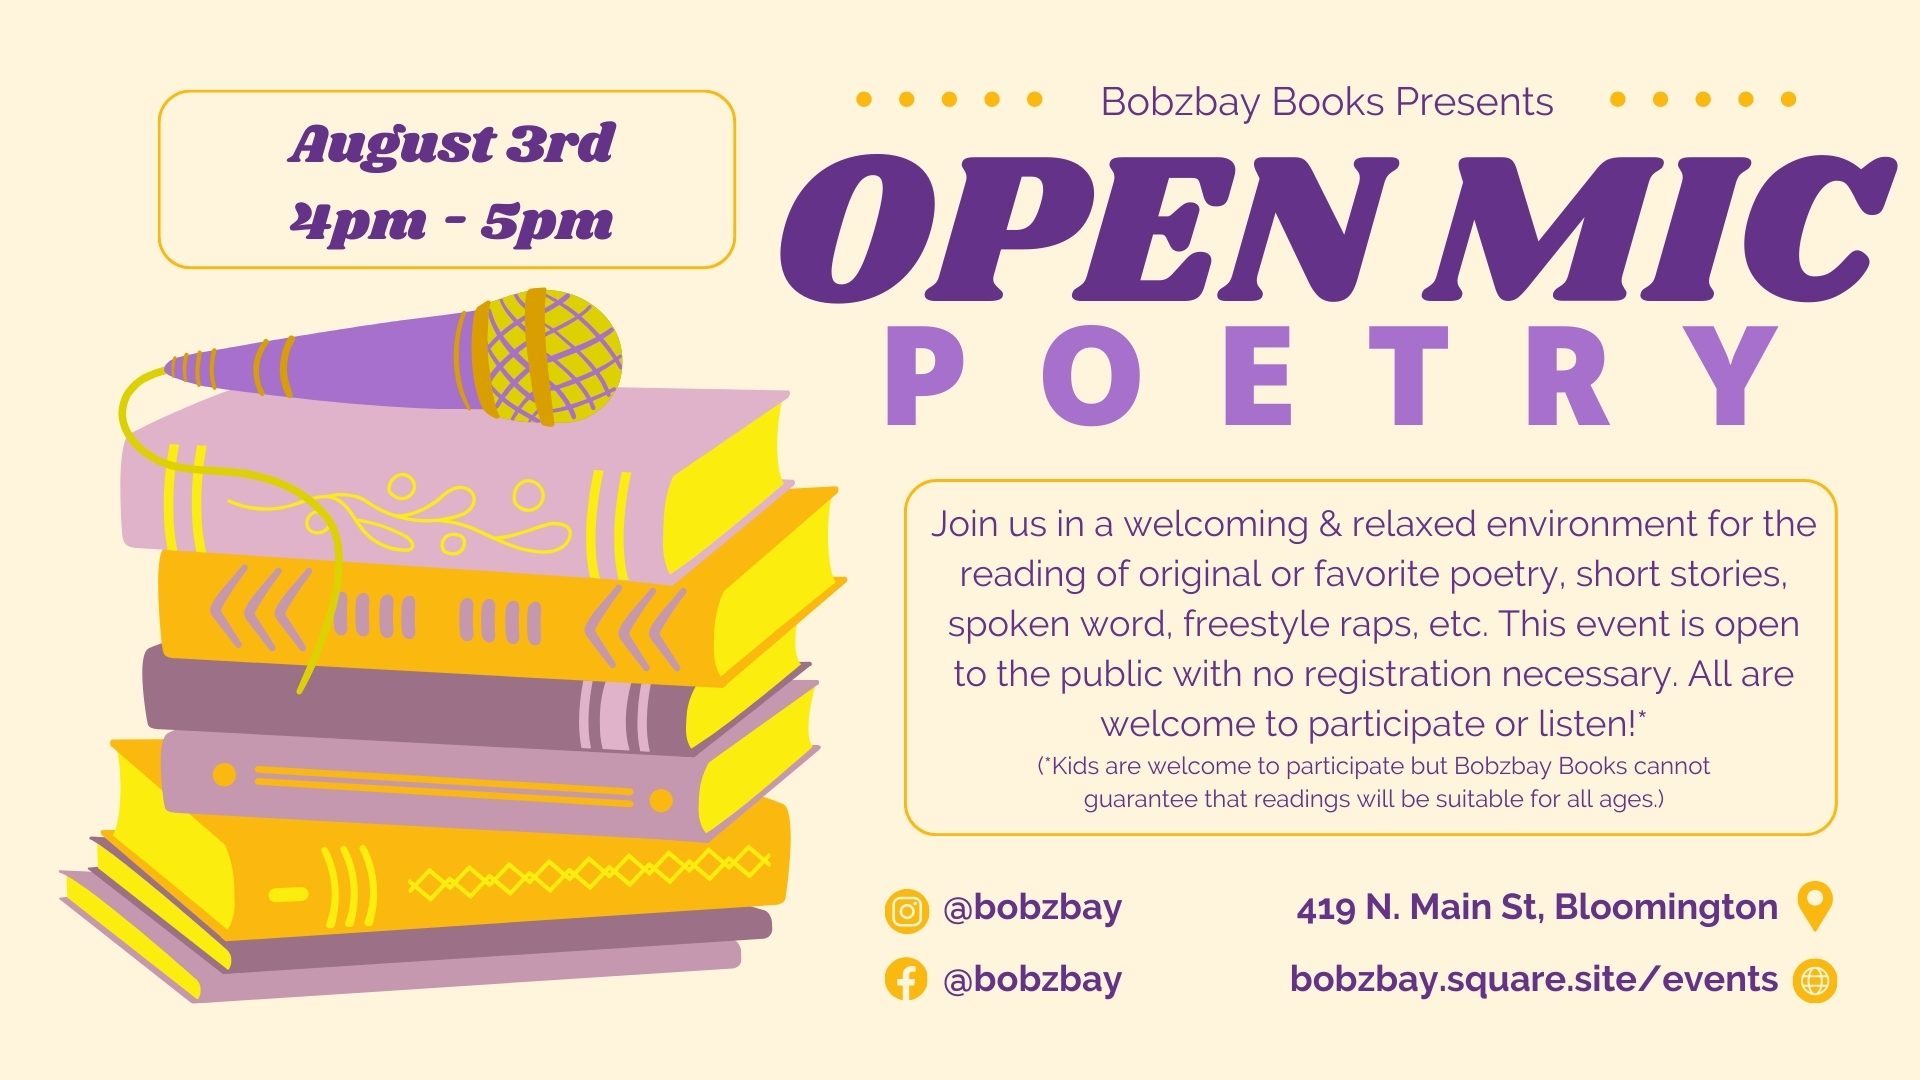 August Open Mic Poetry at Bobzbay Books